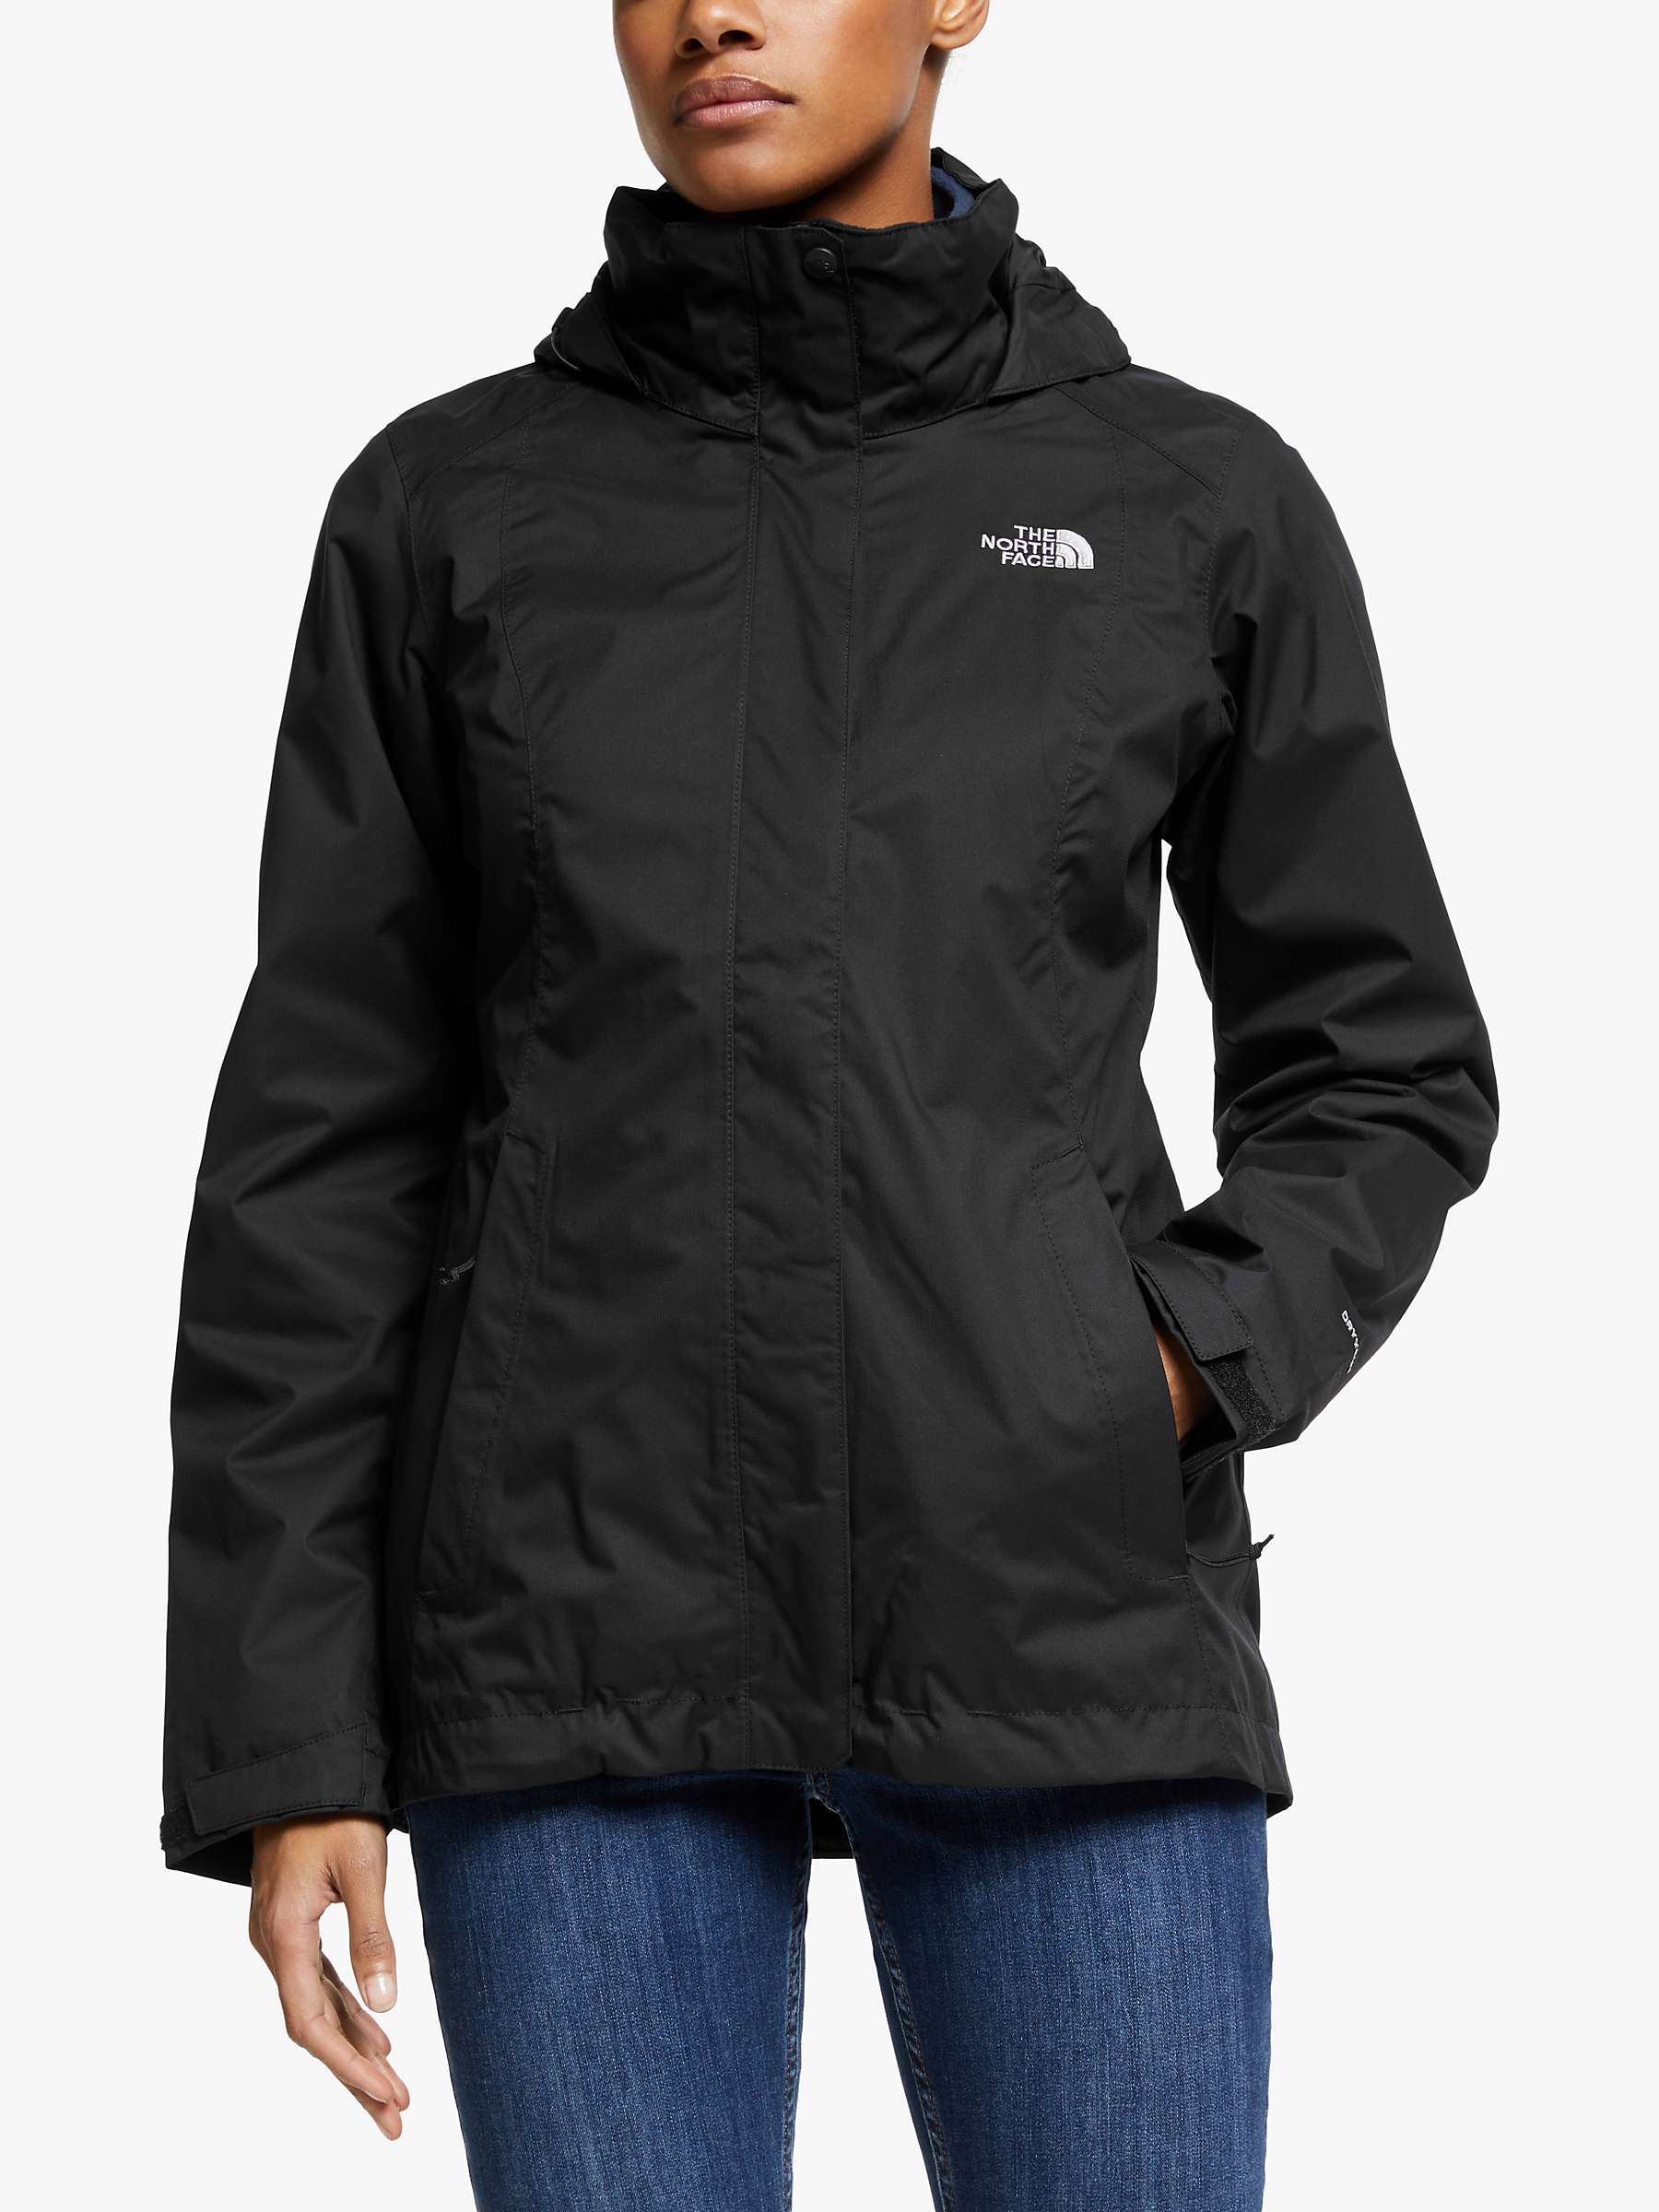 beetle Peddling Heading The North Face Evolve II Triclimate 3-in-1 Waterproof Women's Jacket, Black  at John Lewis & Partners